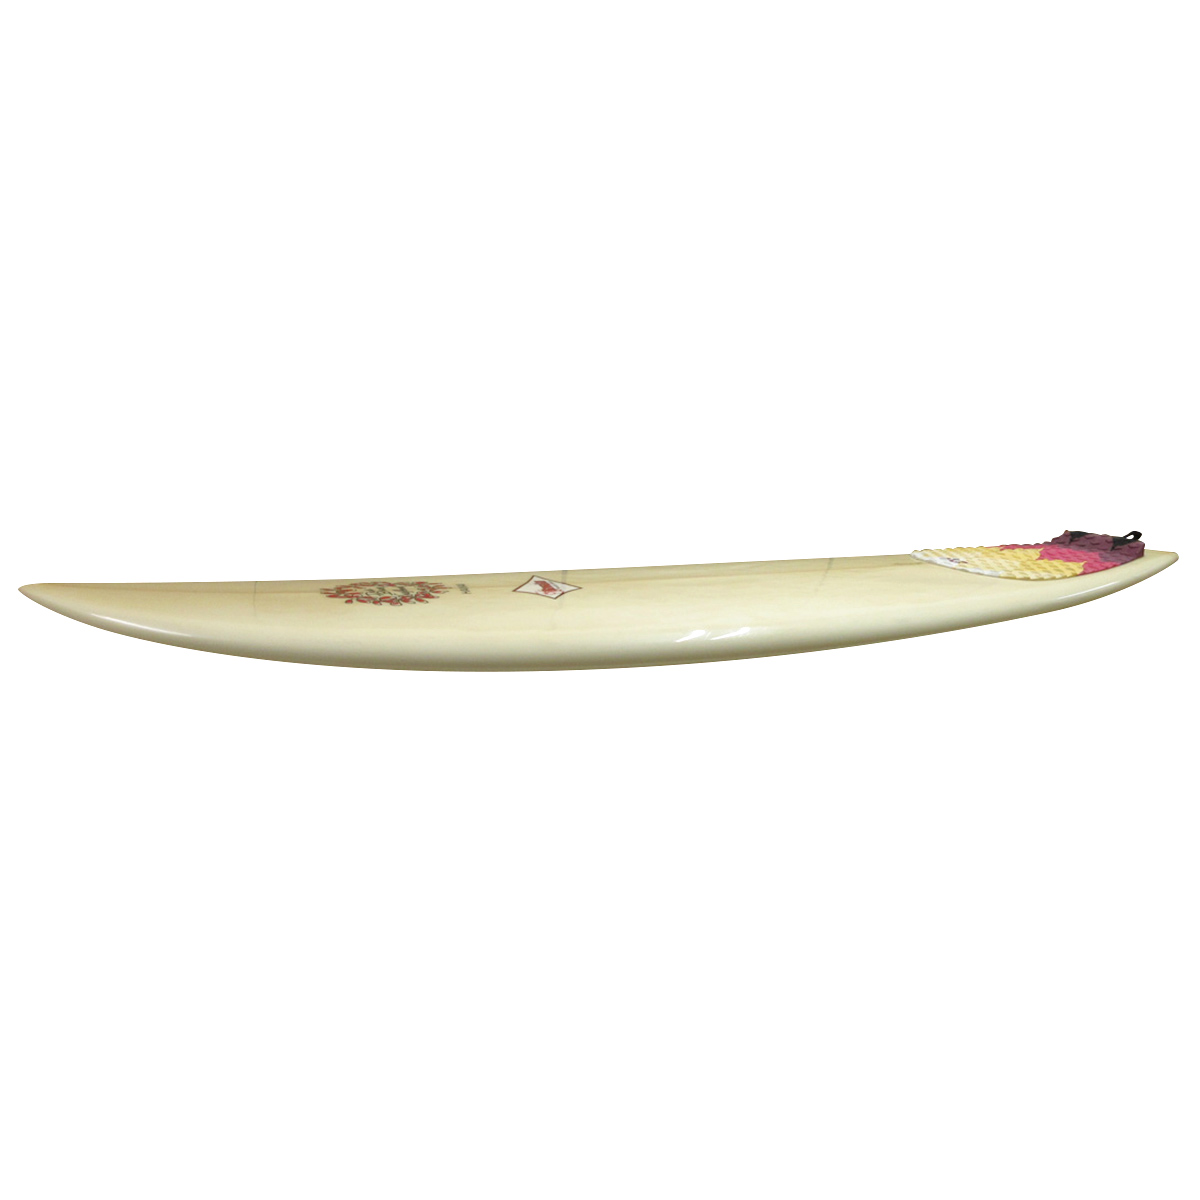 Dick Brewer / Moon Tail 5`8 Shaped By Richard Brewer 